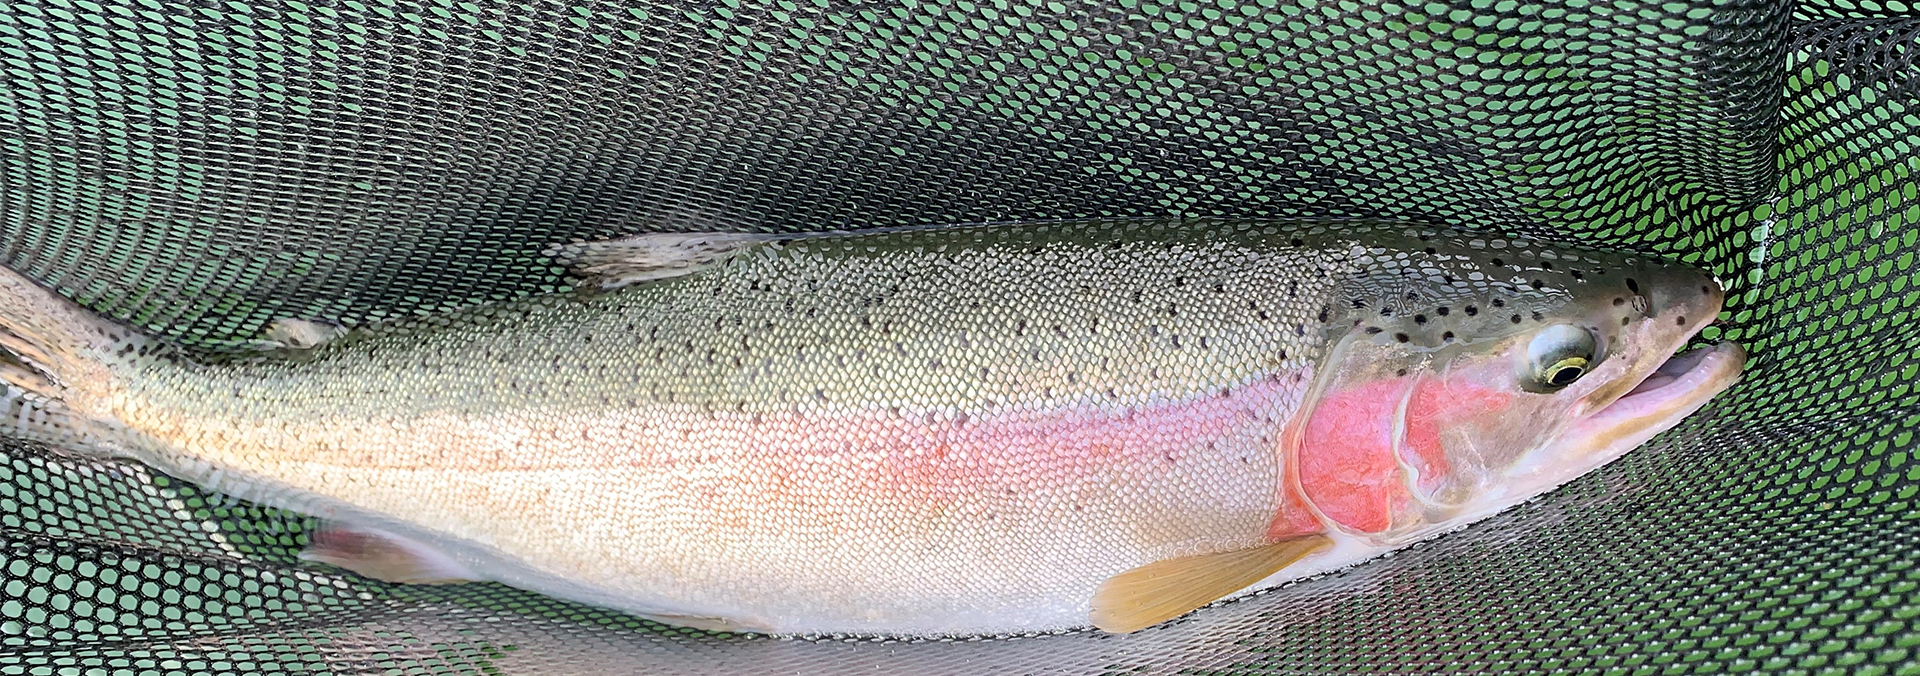 How To Fish For Rainbow Trout Efficiently?